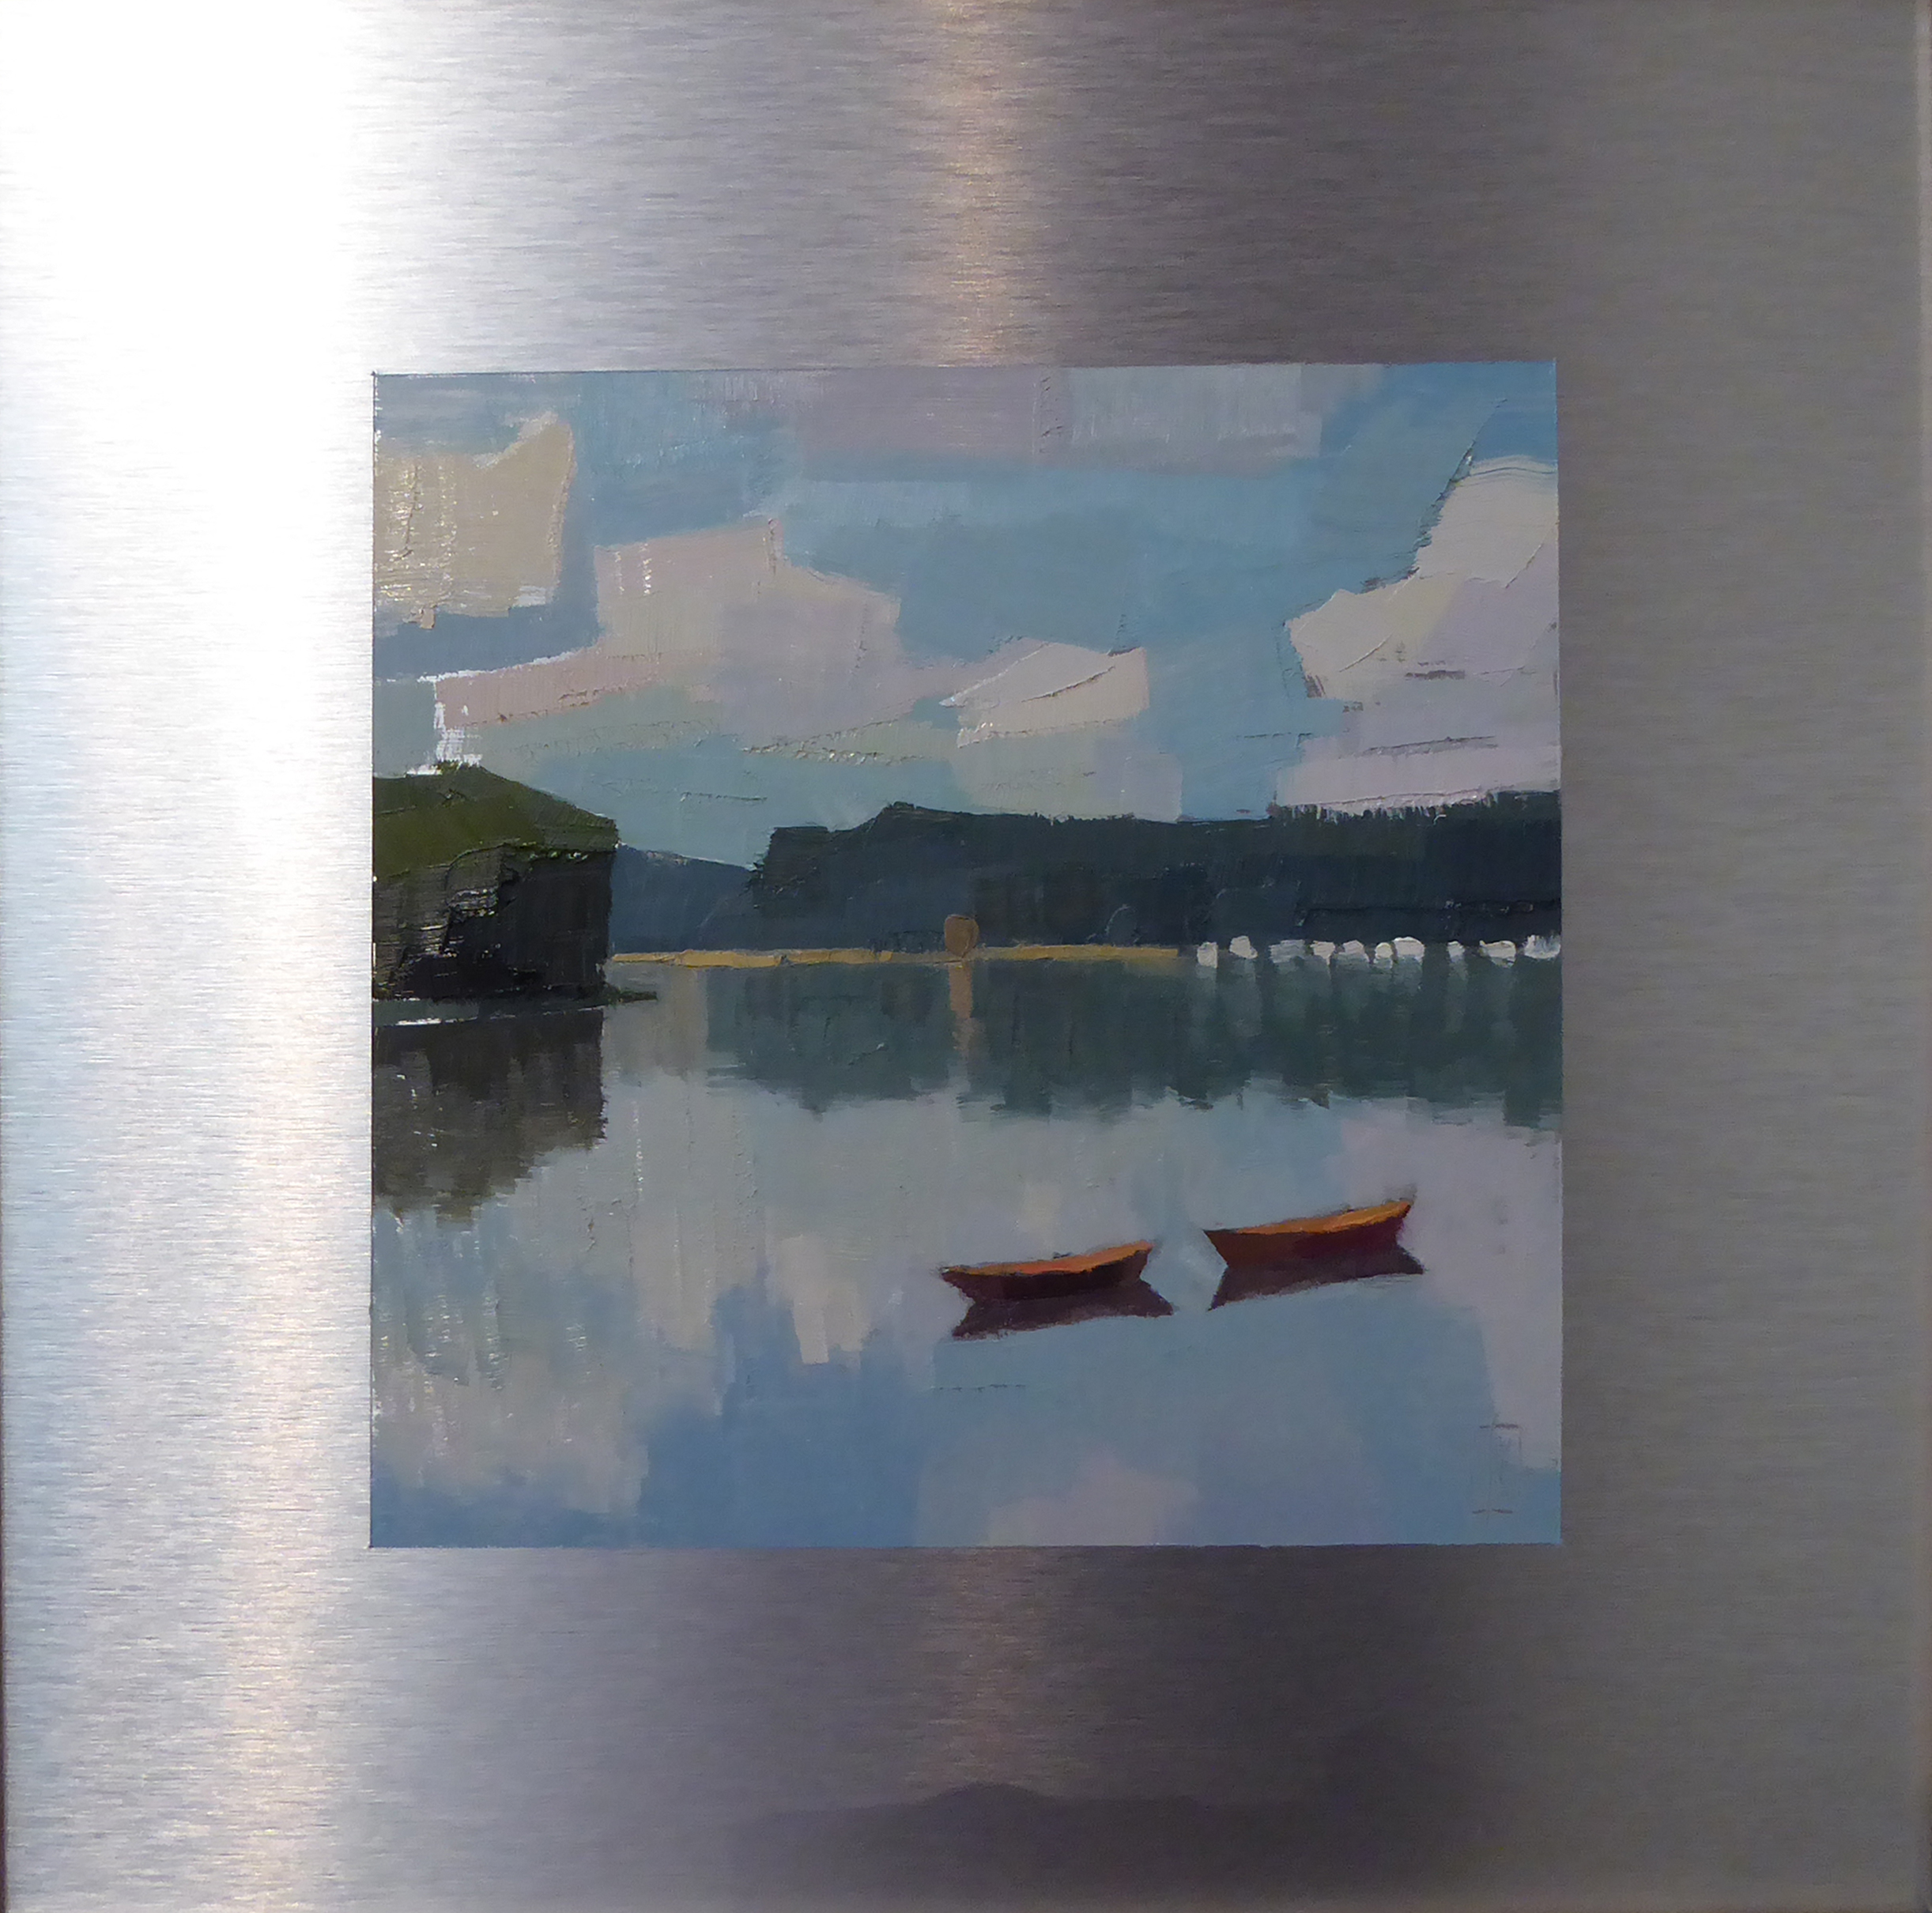   Two Dories  7 x 7 image on 12 x 12 panel  sold 